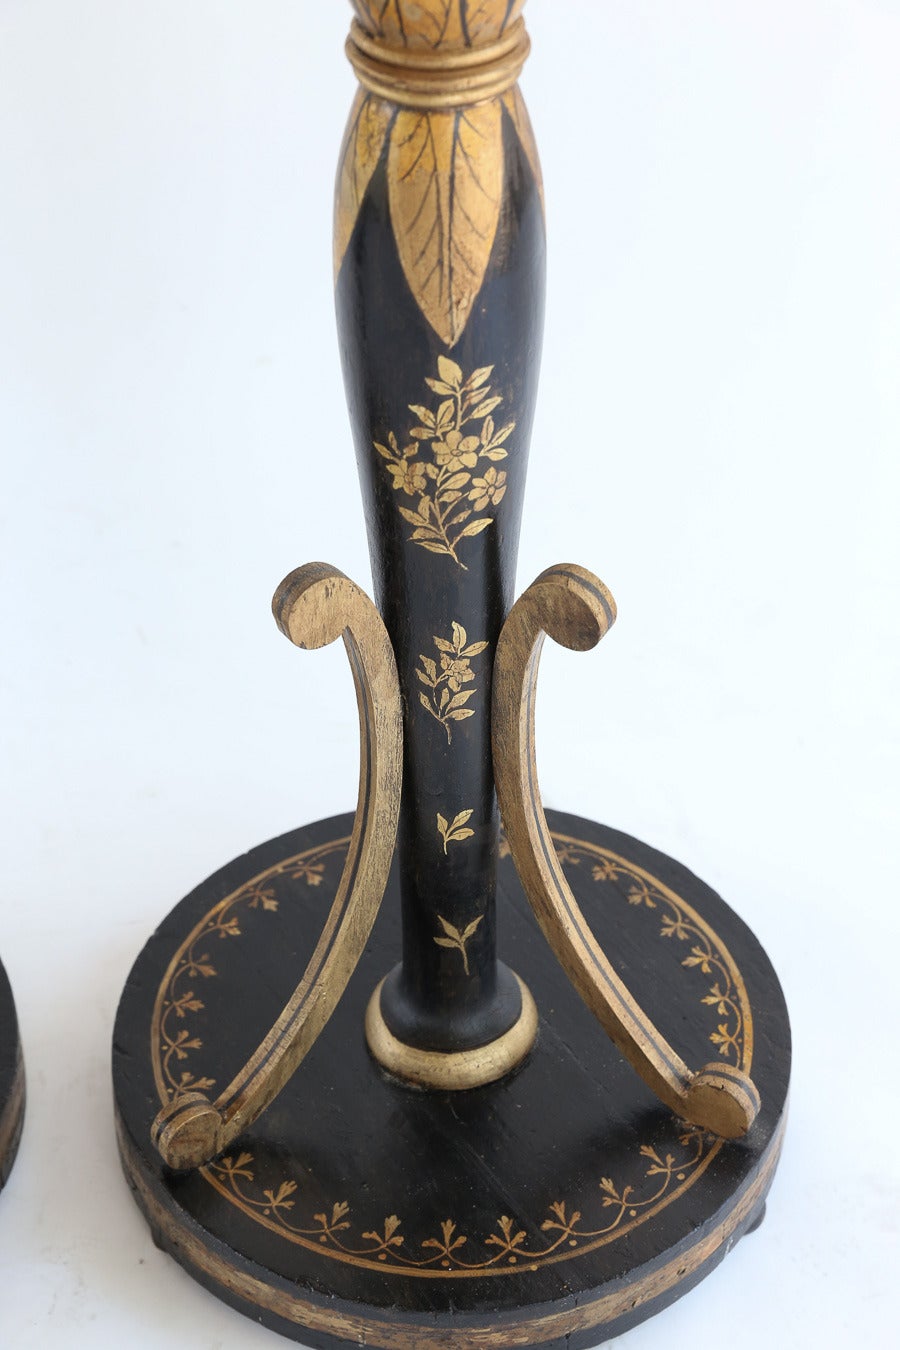 Pair of fine and rare early 19th century English Regency parcel-gilt and ebonized torchère.